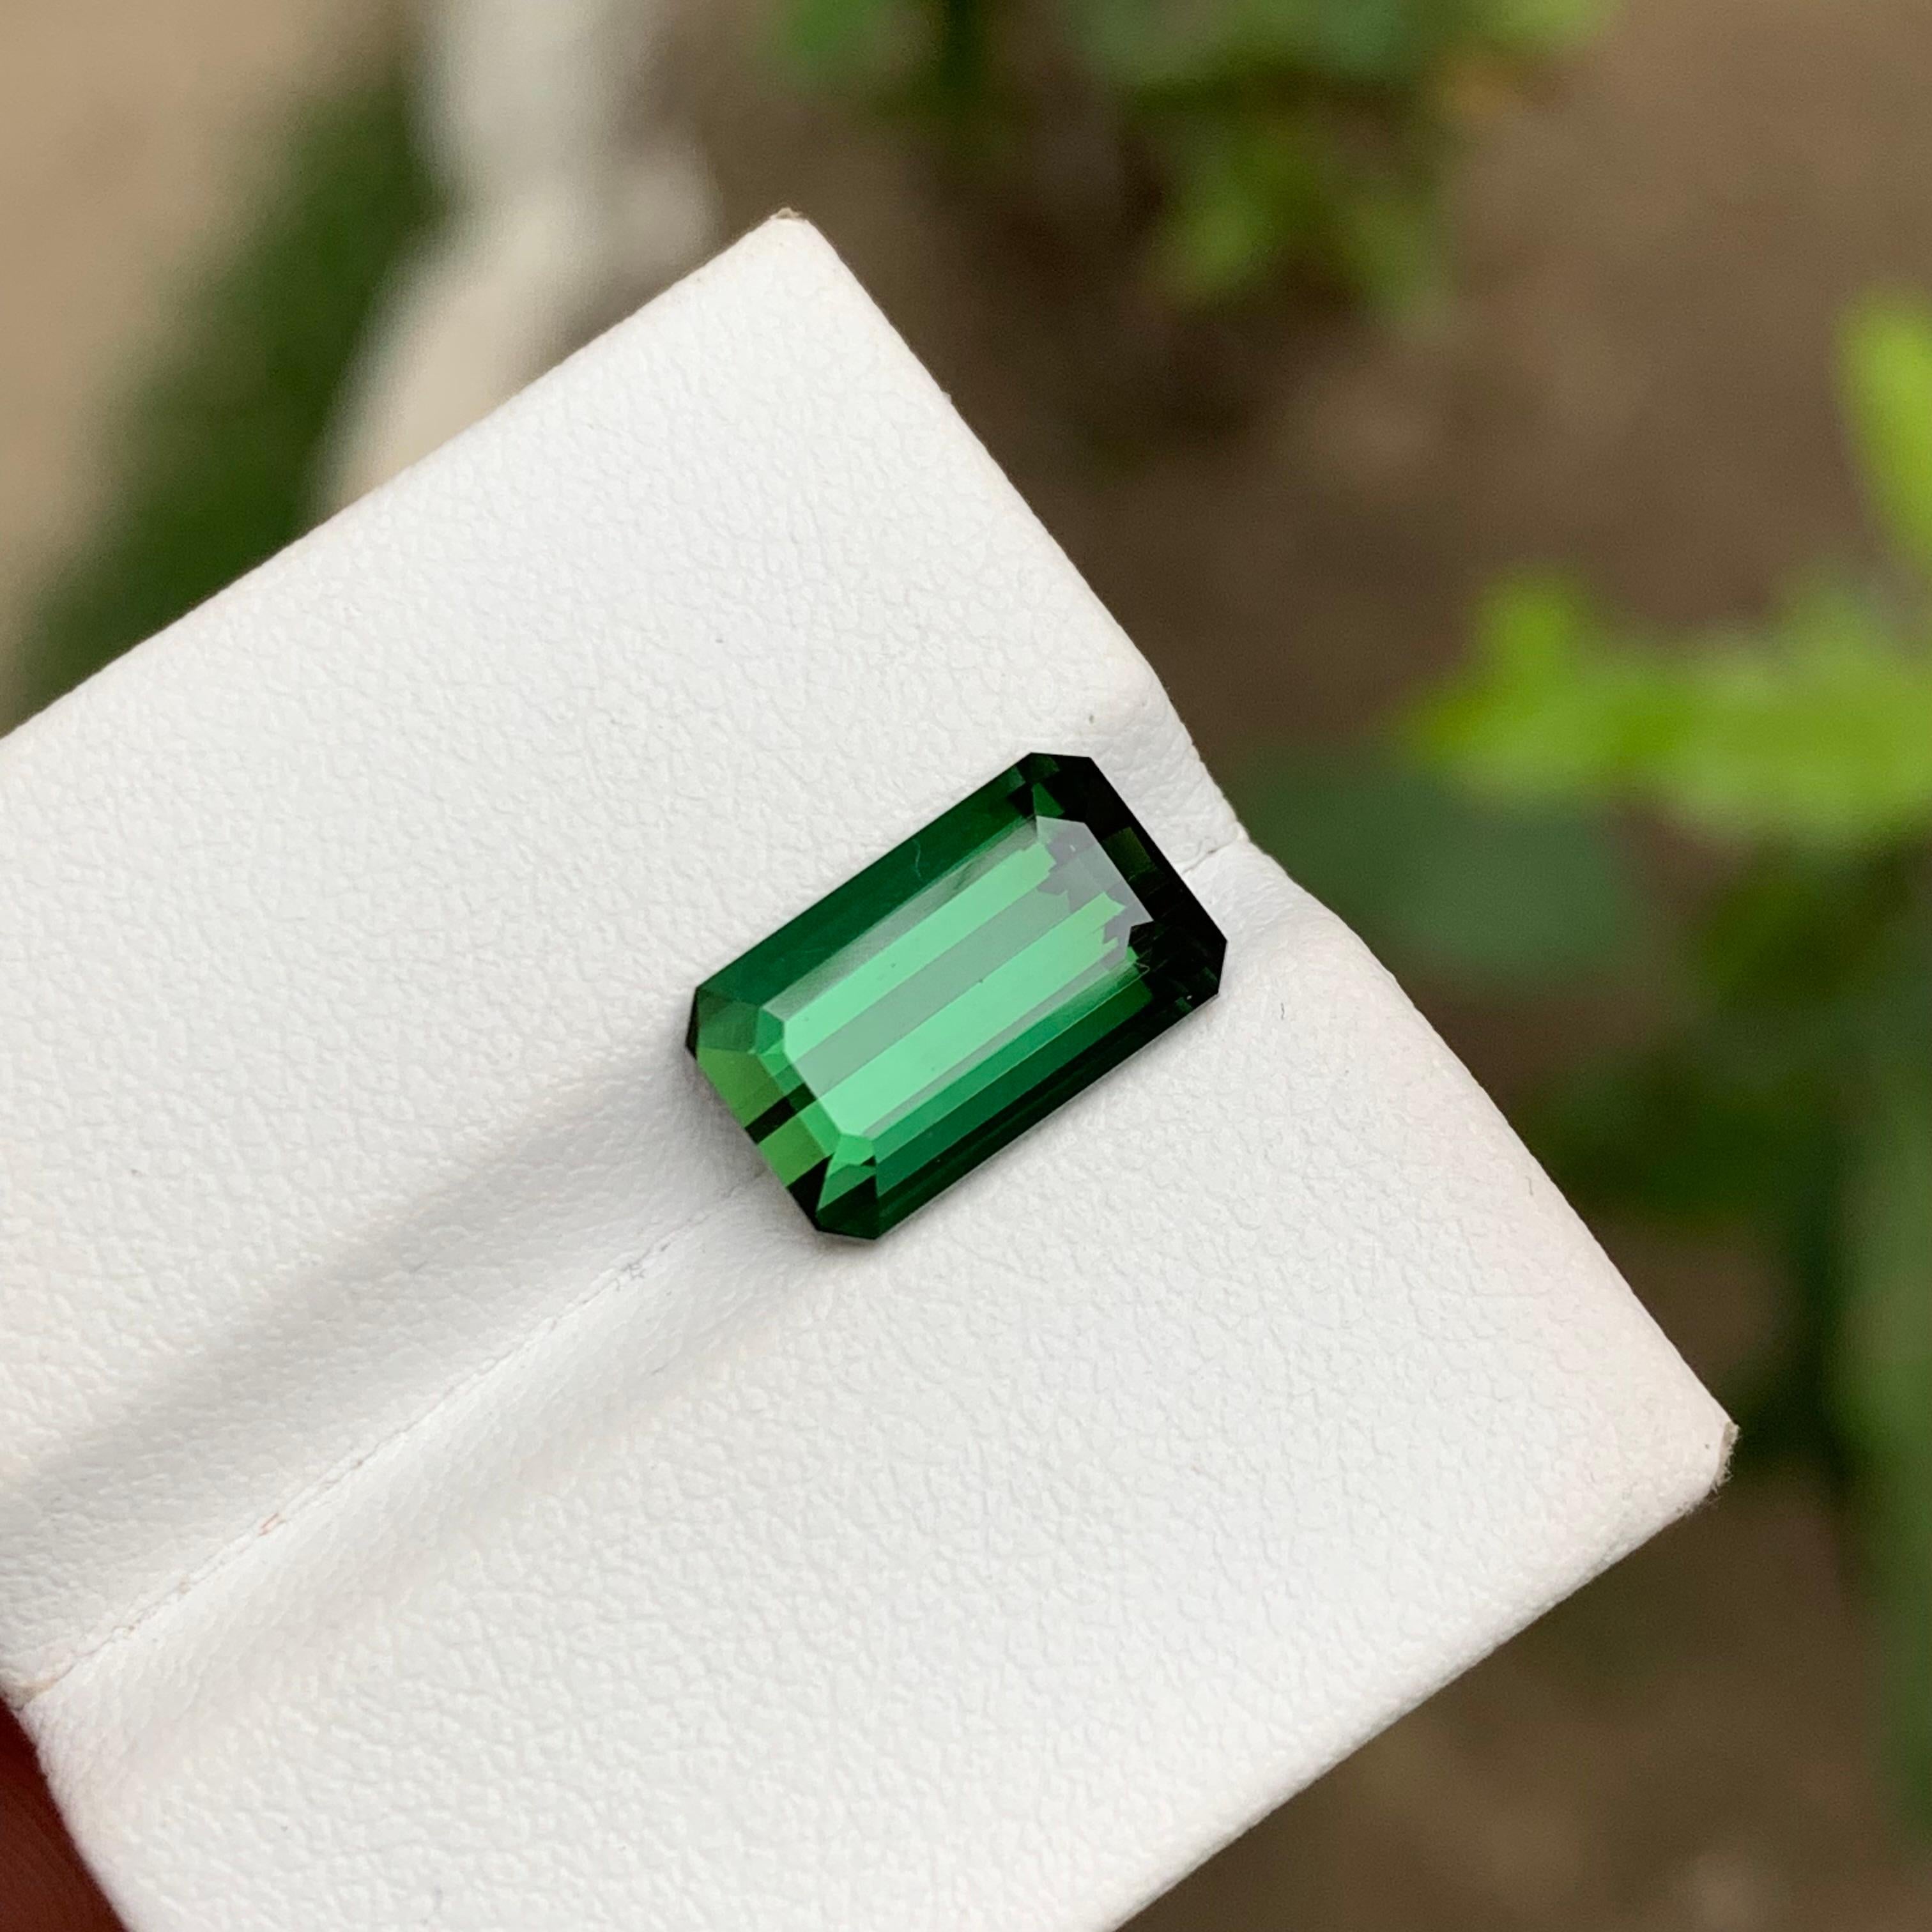 Rare Deep Green Natural Tourmaline Loose Gemstone, 3.75 Ct Emerald Cut for Ring For Sale 6